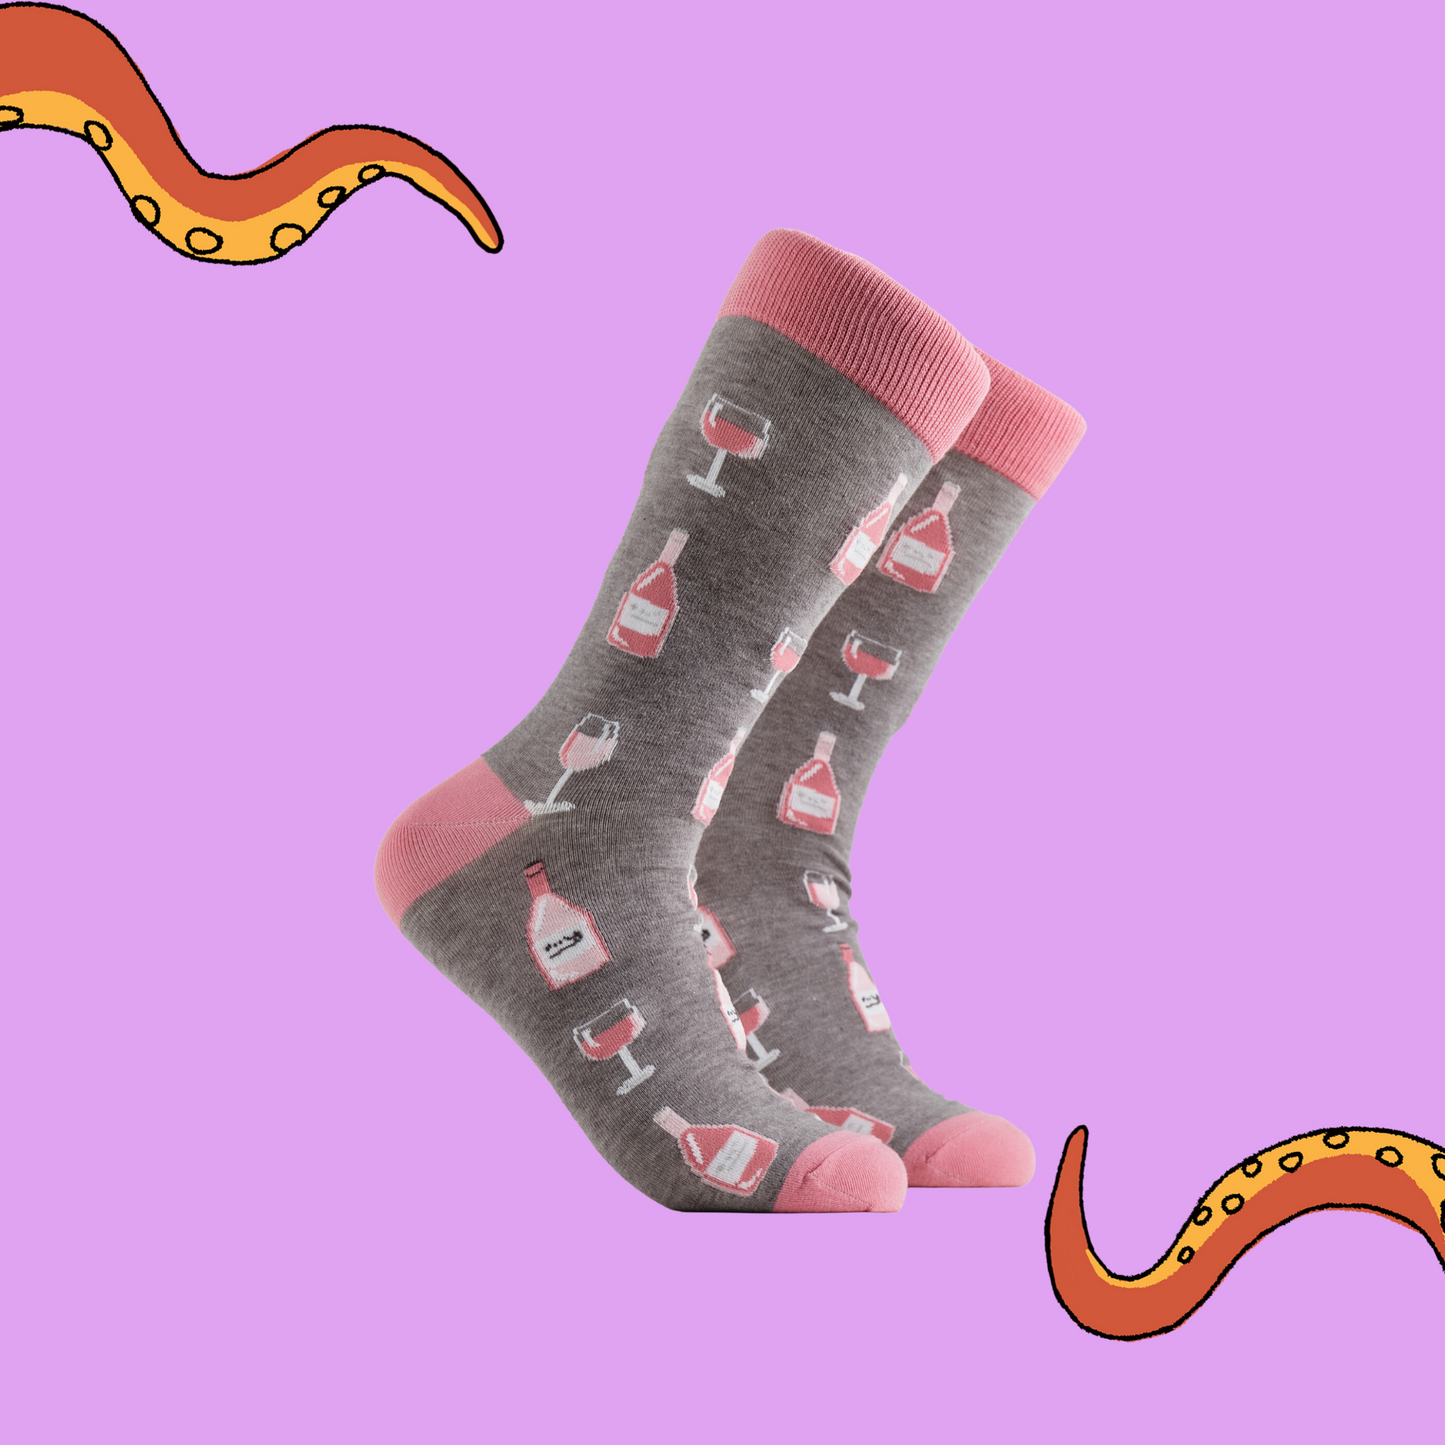 A pair of socks depicting Rose wine bottles and glasses. Grey legs, pink cuff, heel and toe.